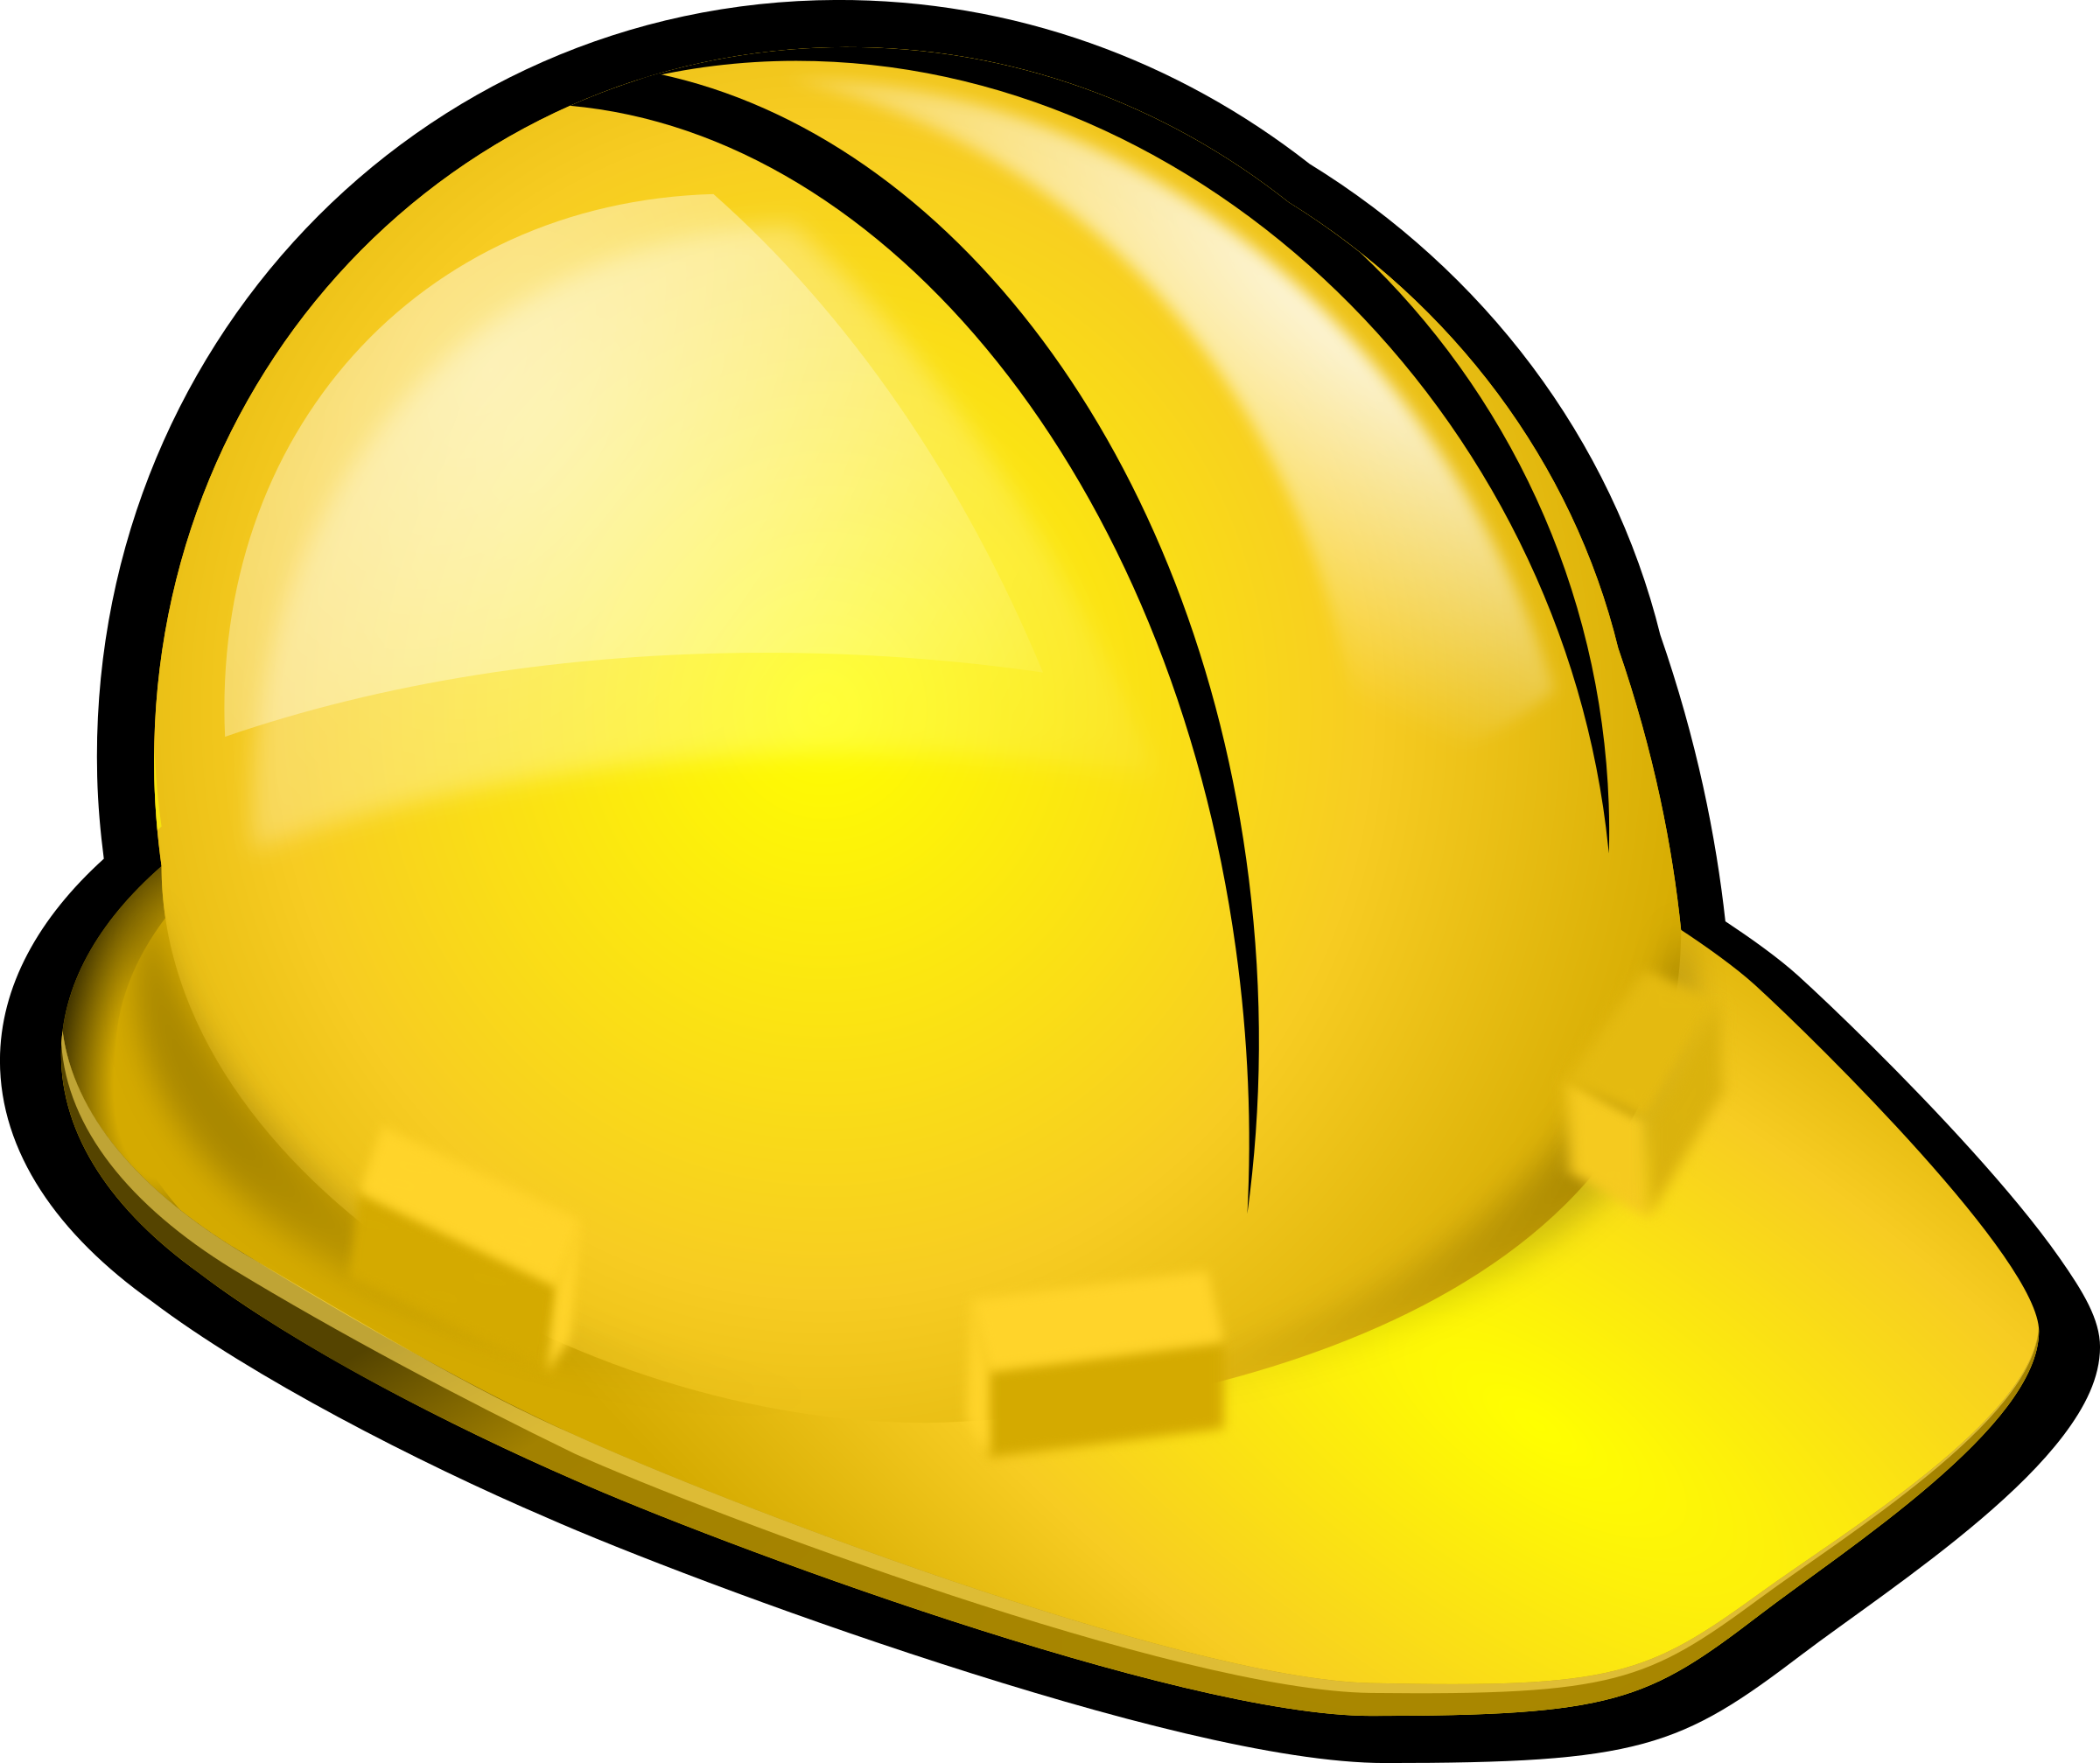 Image Courtesy Of Pixabay - Construction Hat Cartoon - (2400x2015) Png Clip...